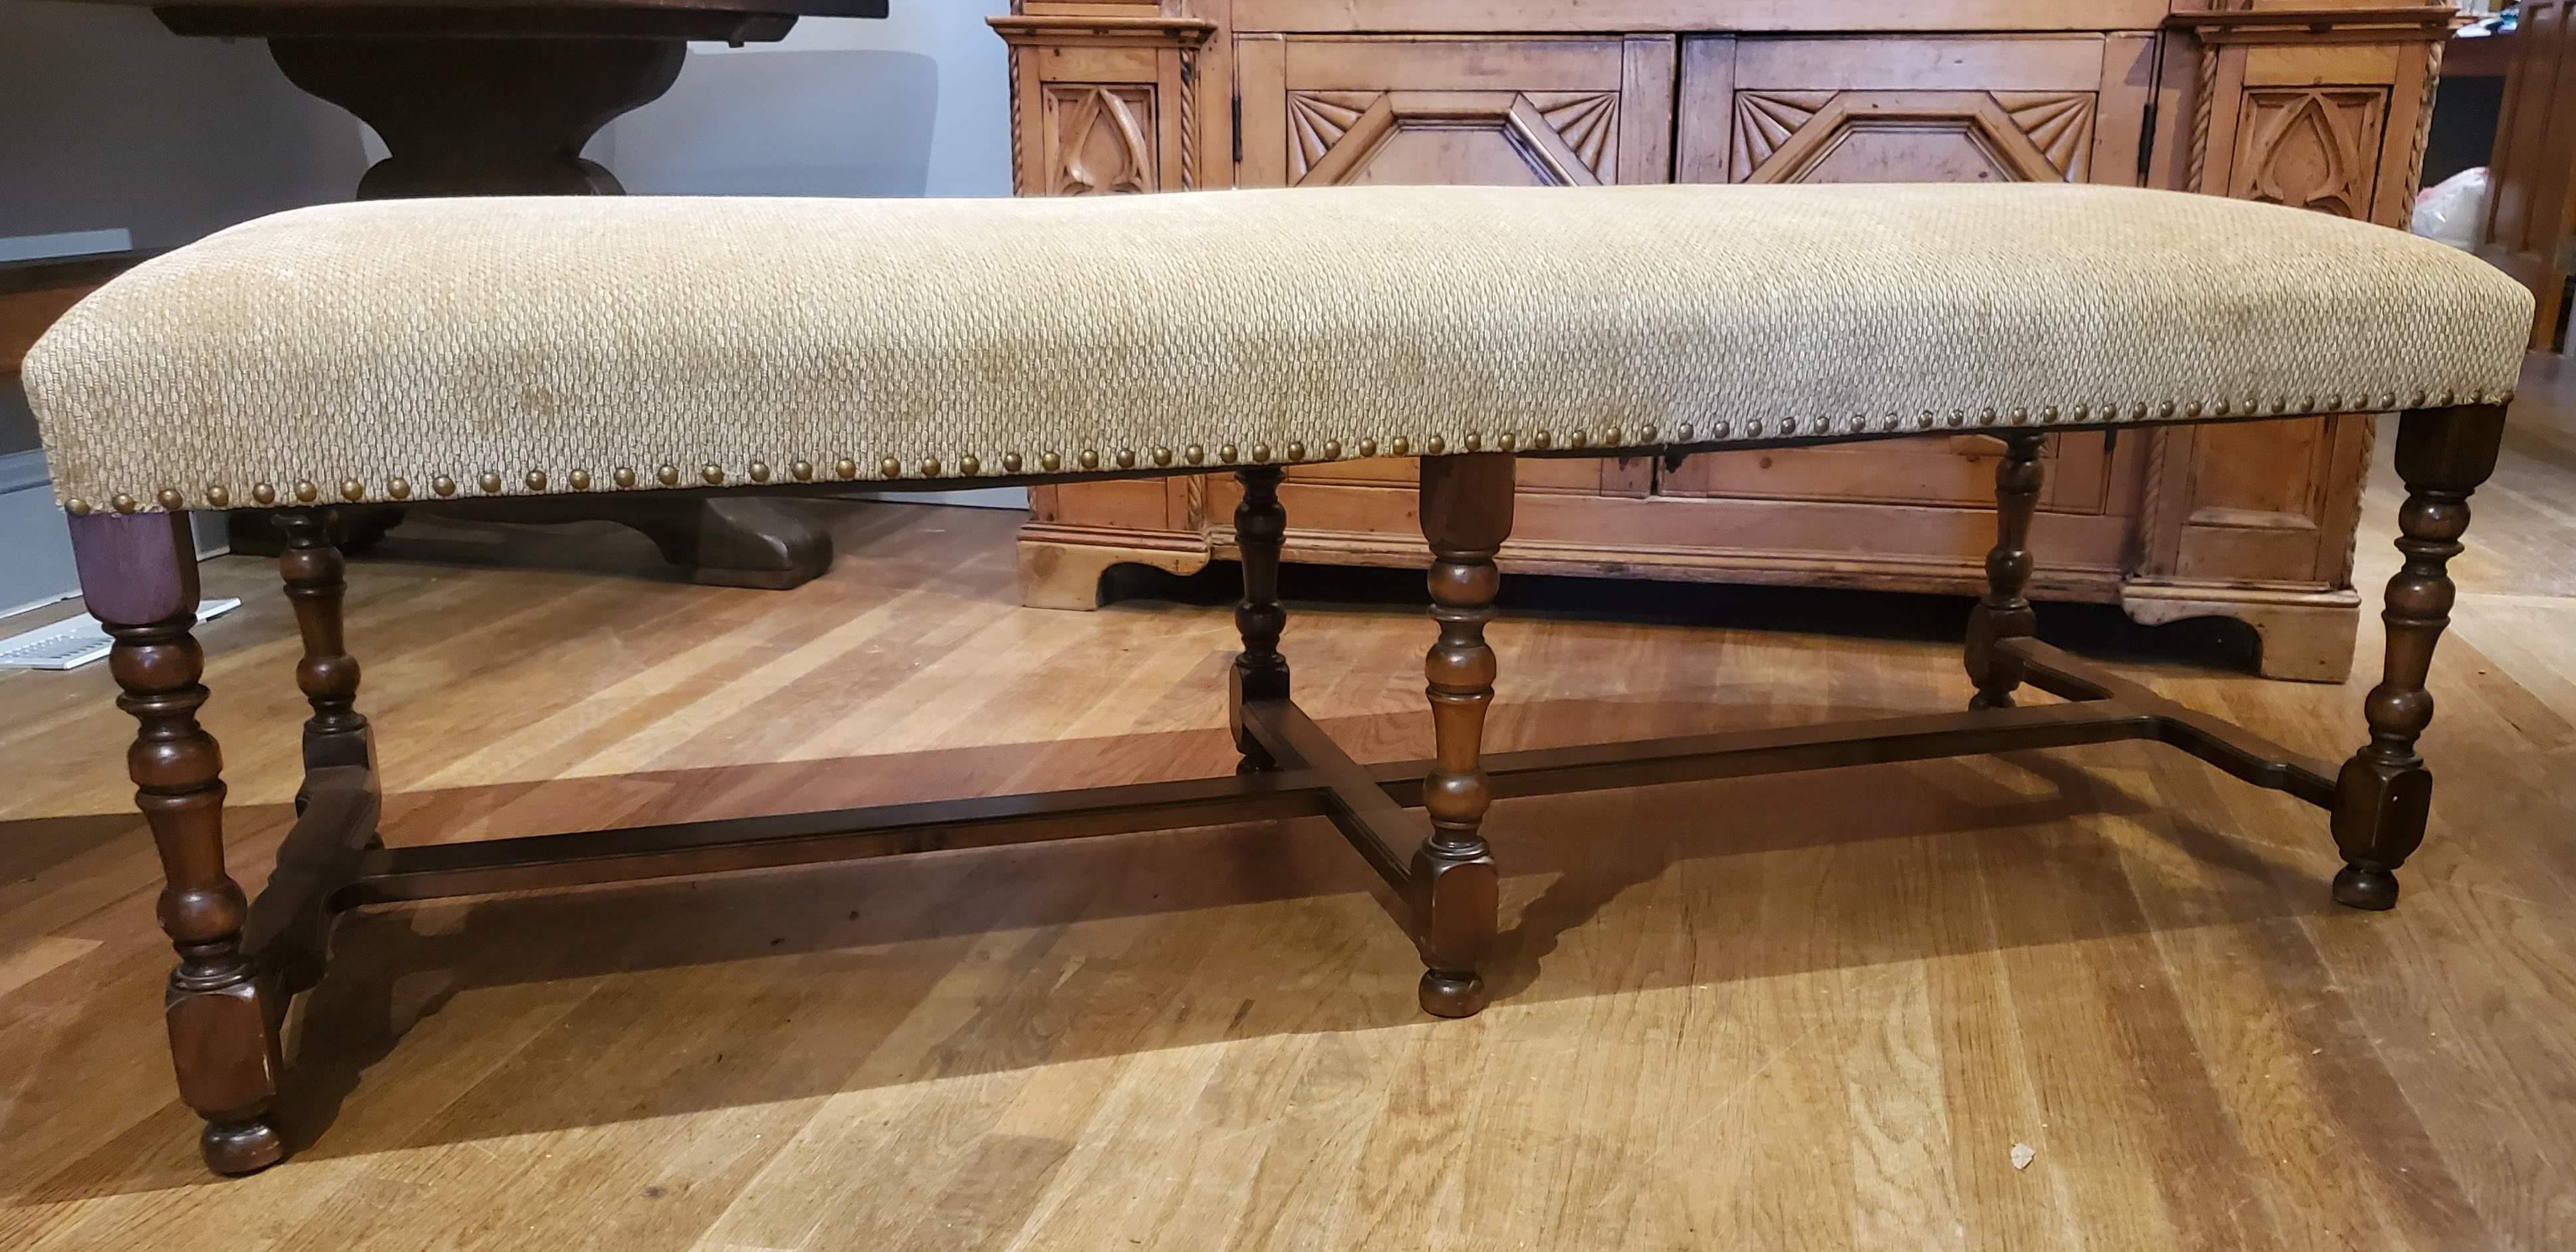 This lovely Louis XIV style French Provincial upholstered bench is the perfect for the foot of your bed or a comfy addition to your large dining room table. Made of walnut with six turned legs and stretchers and upholstered in a tan textured